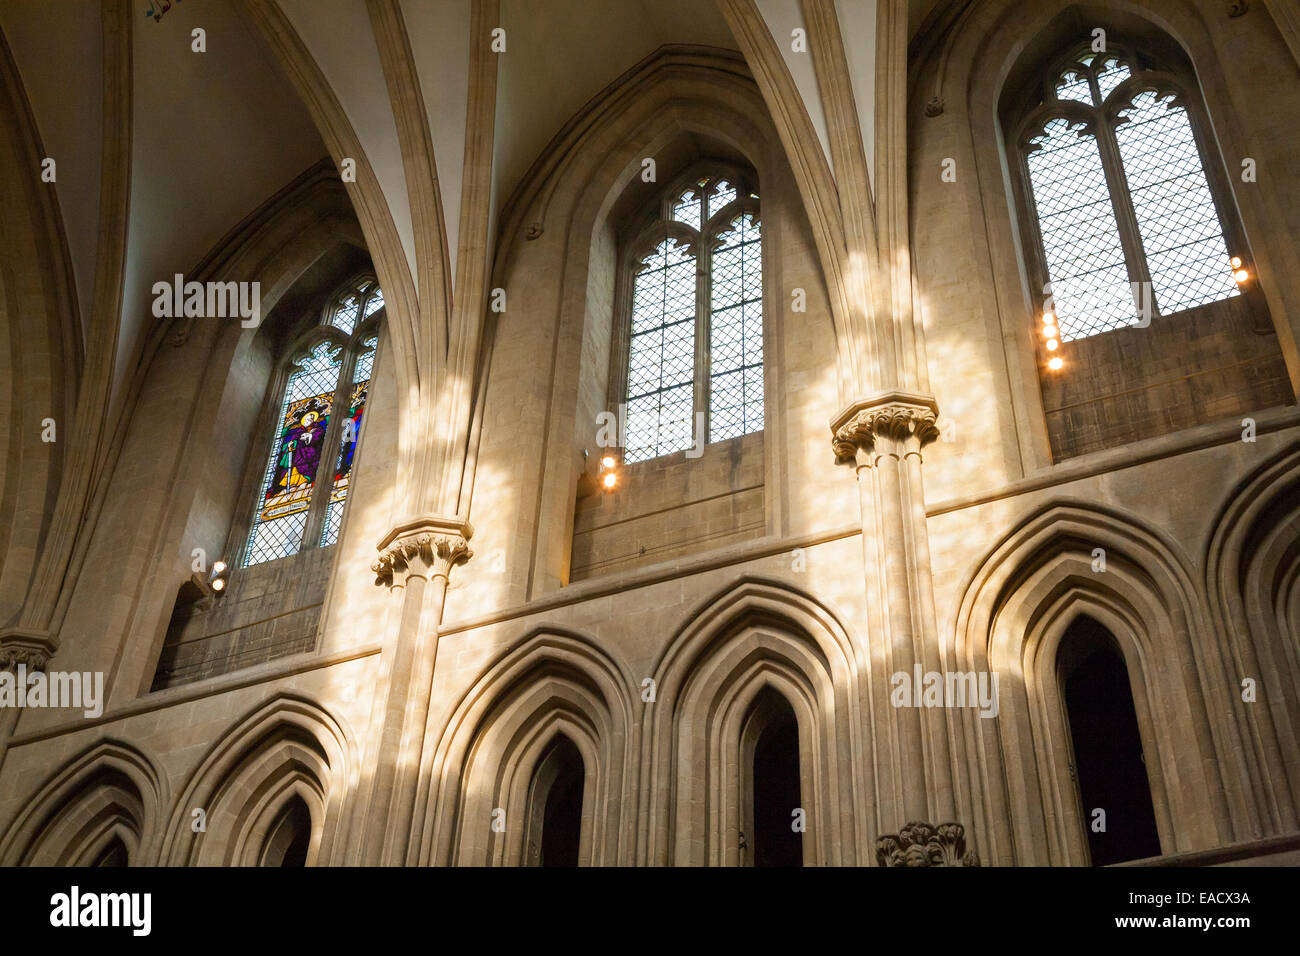 Arch / arched arch windows inside nave / looking up to the vault of the nave of Wells Cathedral (vaulted ceiling). Somerset UK. Stock Photo